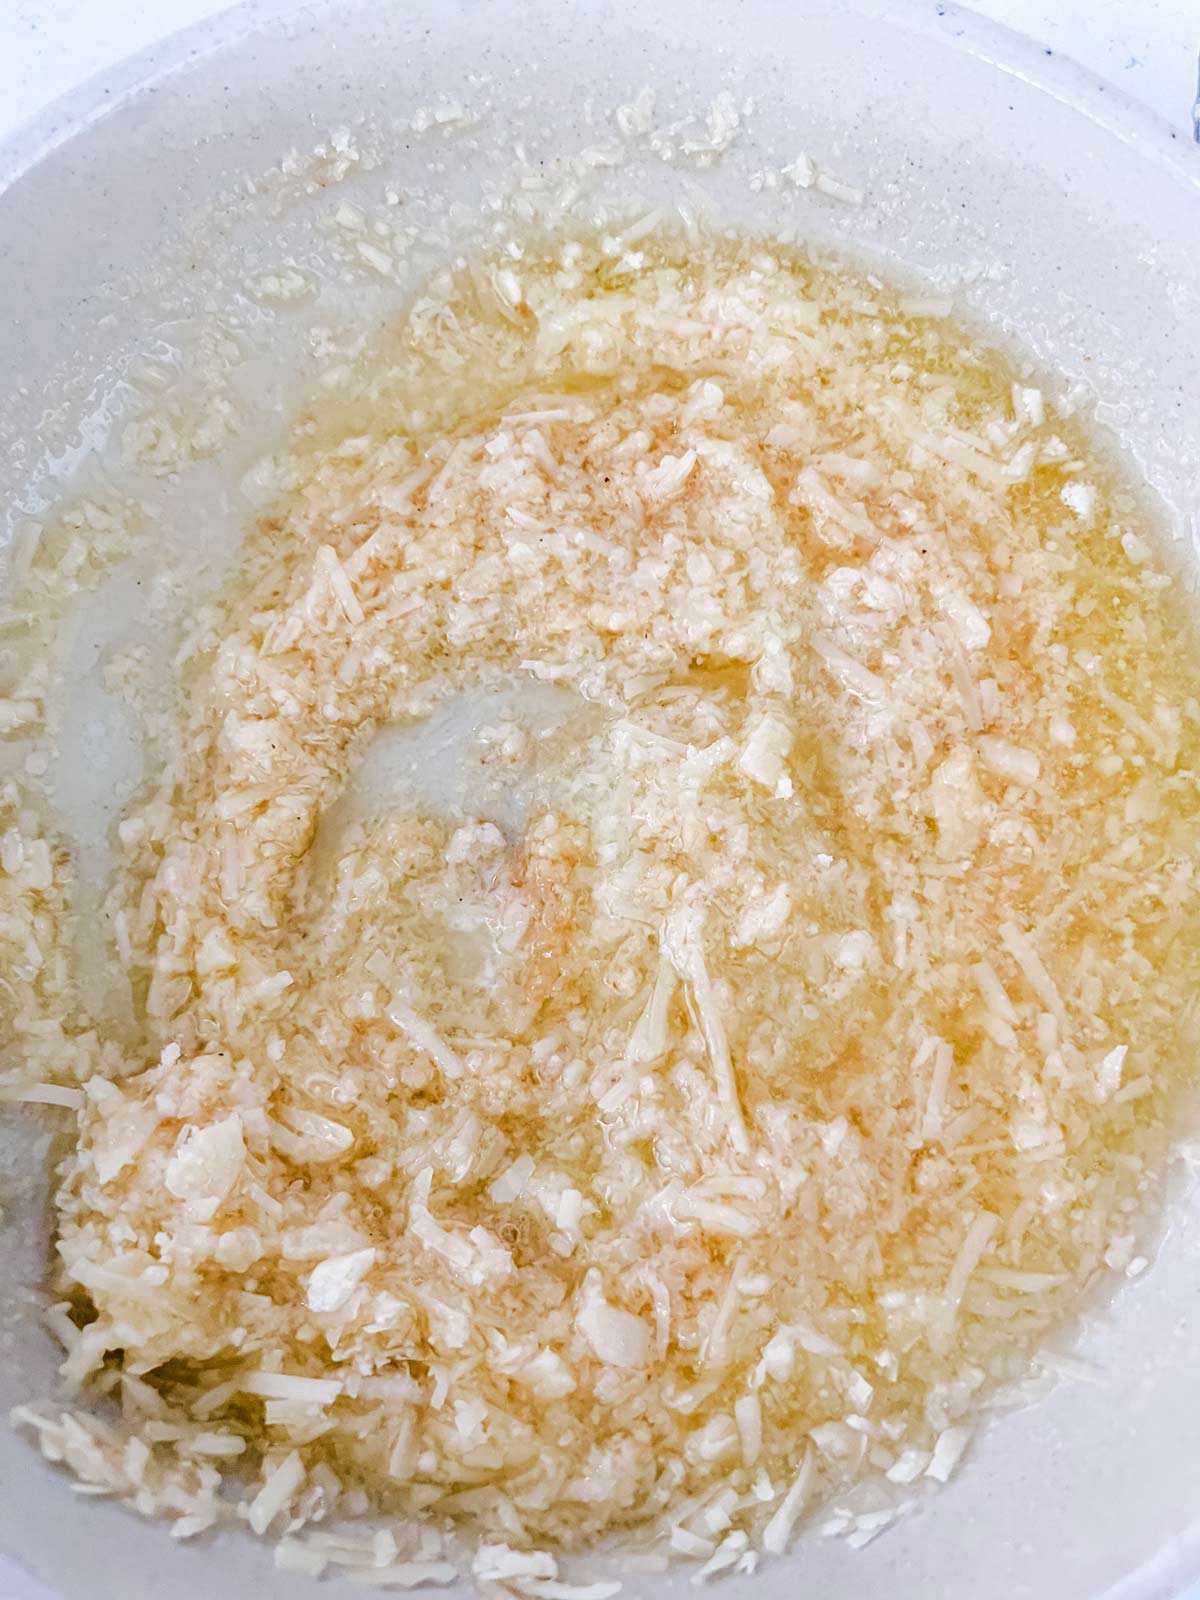 A cheesy oil and seasoning mixture for garlic bread.